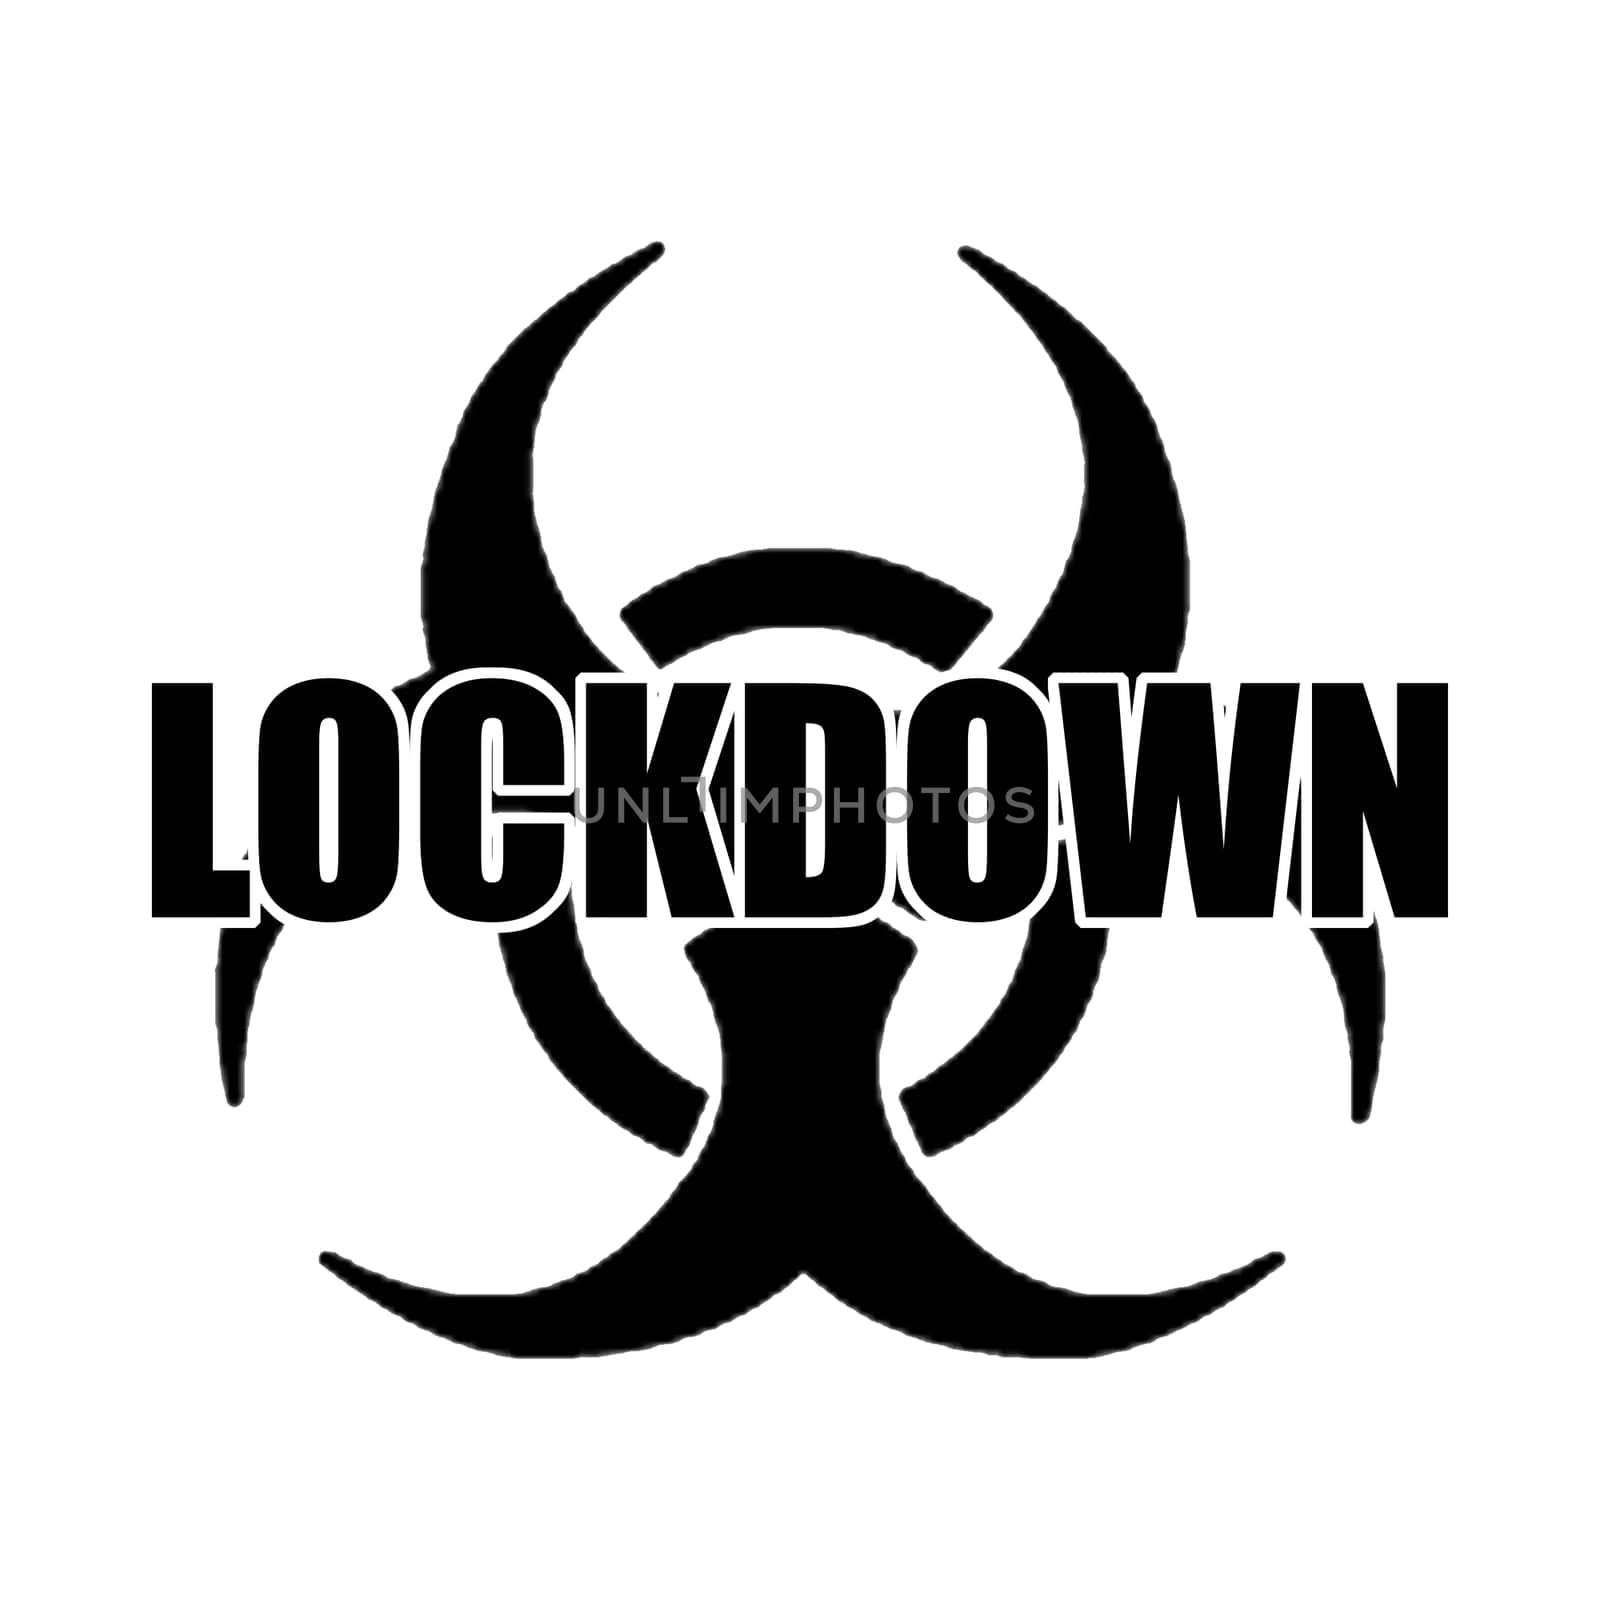 A biohazard sign with the text "lockdown".